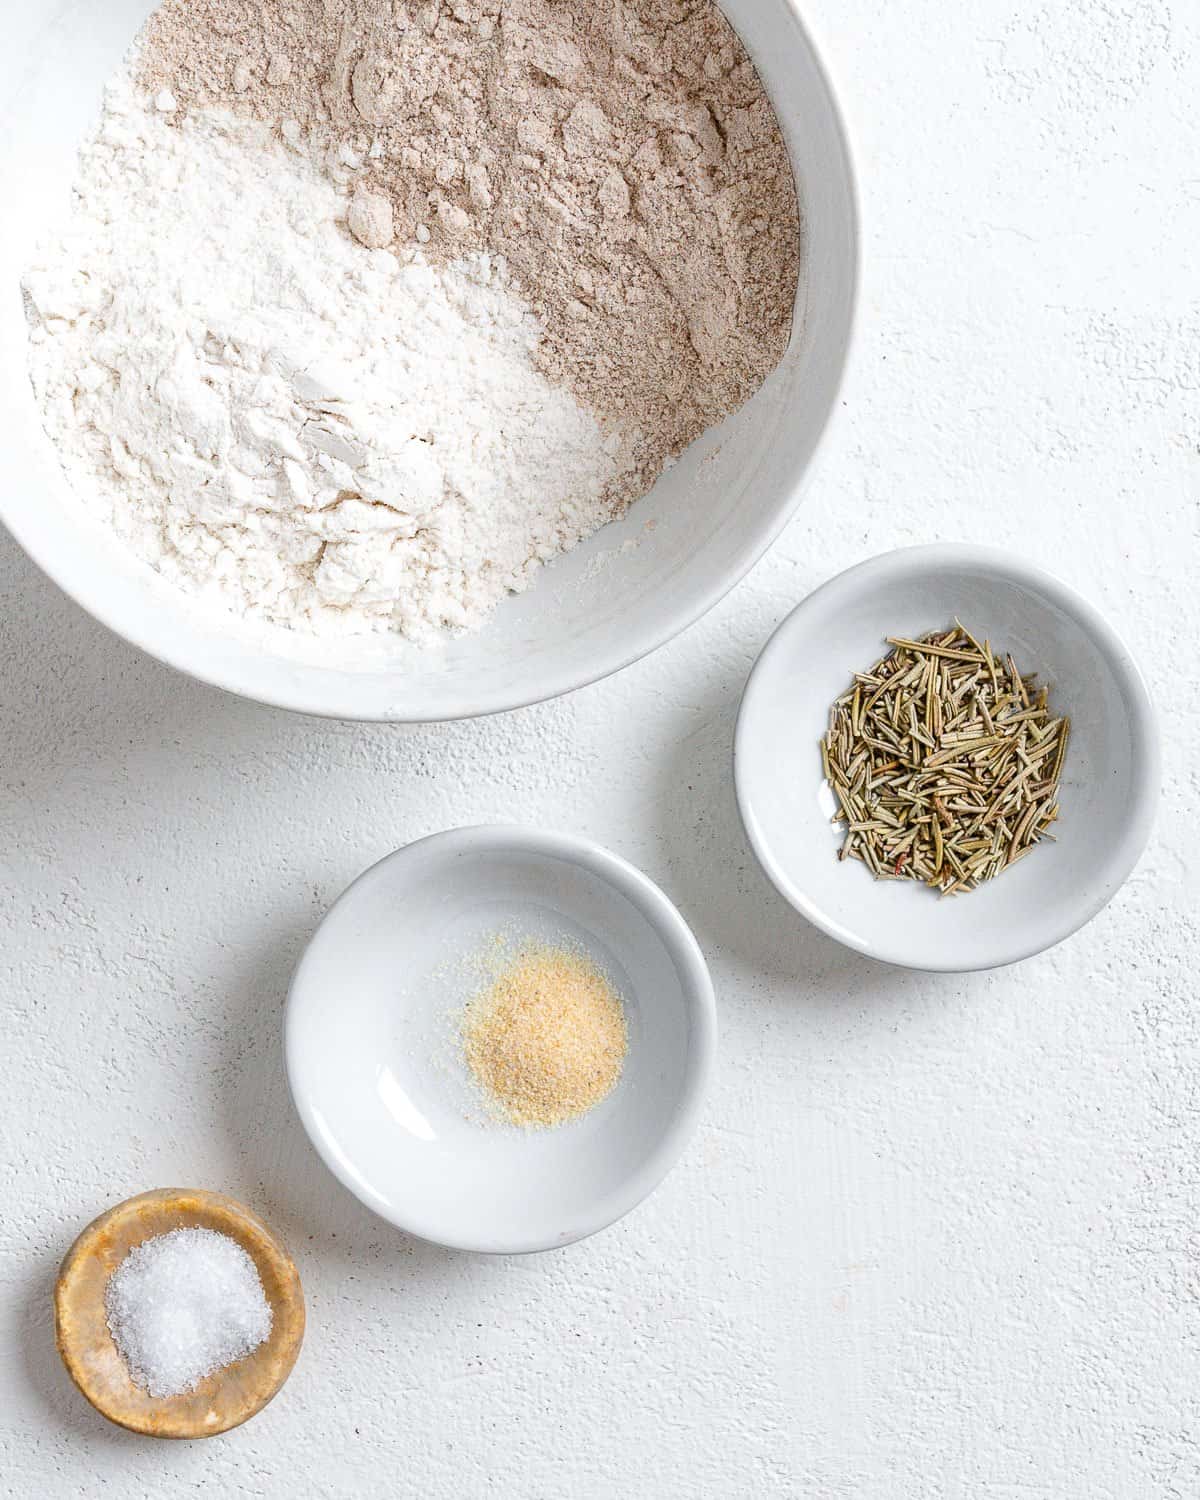 ingredients for Rosemary Vegan Crackers measured out in small white bowls against a white surface